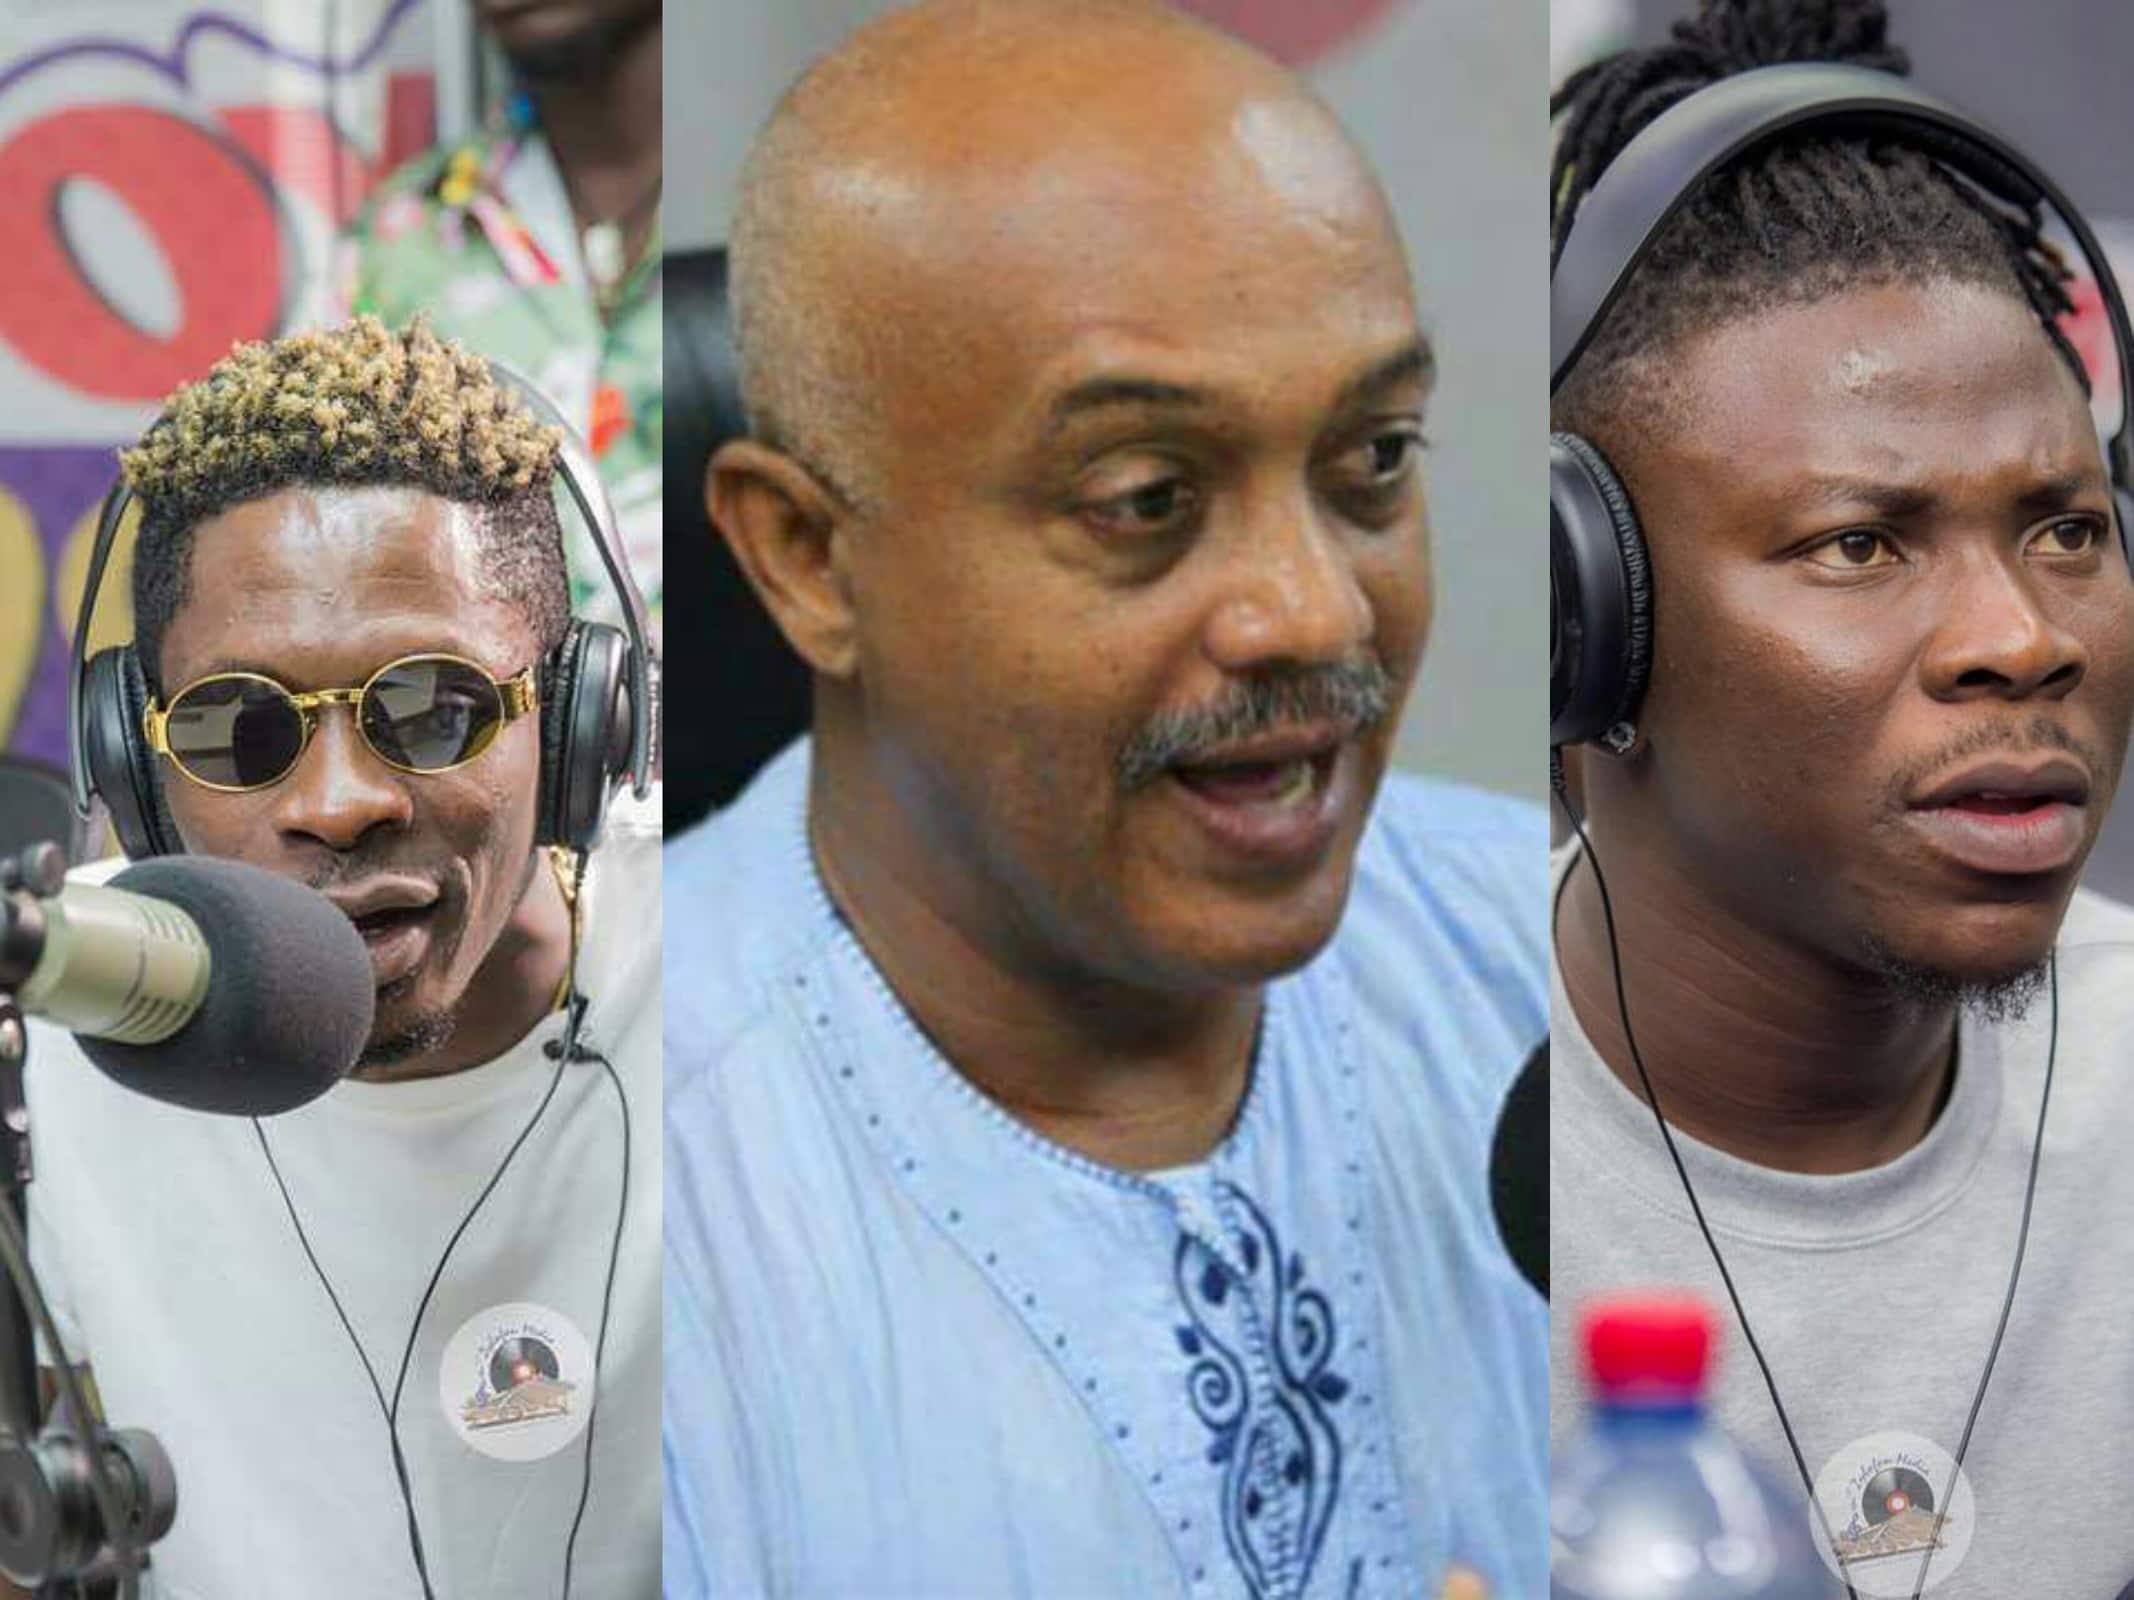 Casely-Hayford petitions Council of State to resolve Shatta Wale, Stonebwoy feud